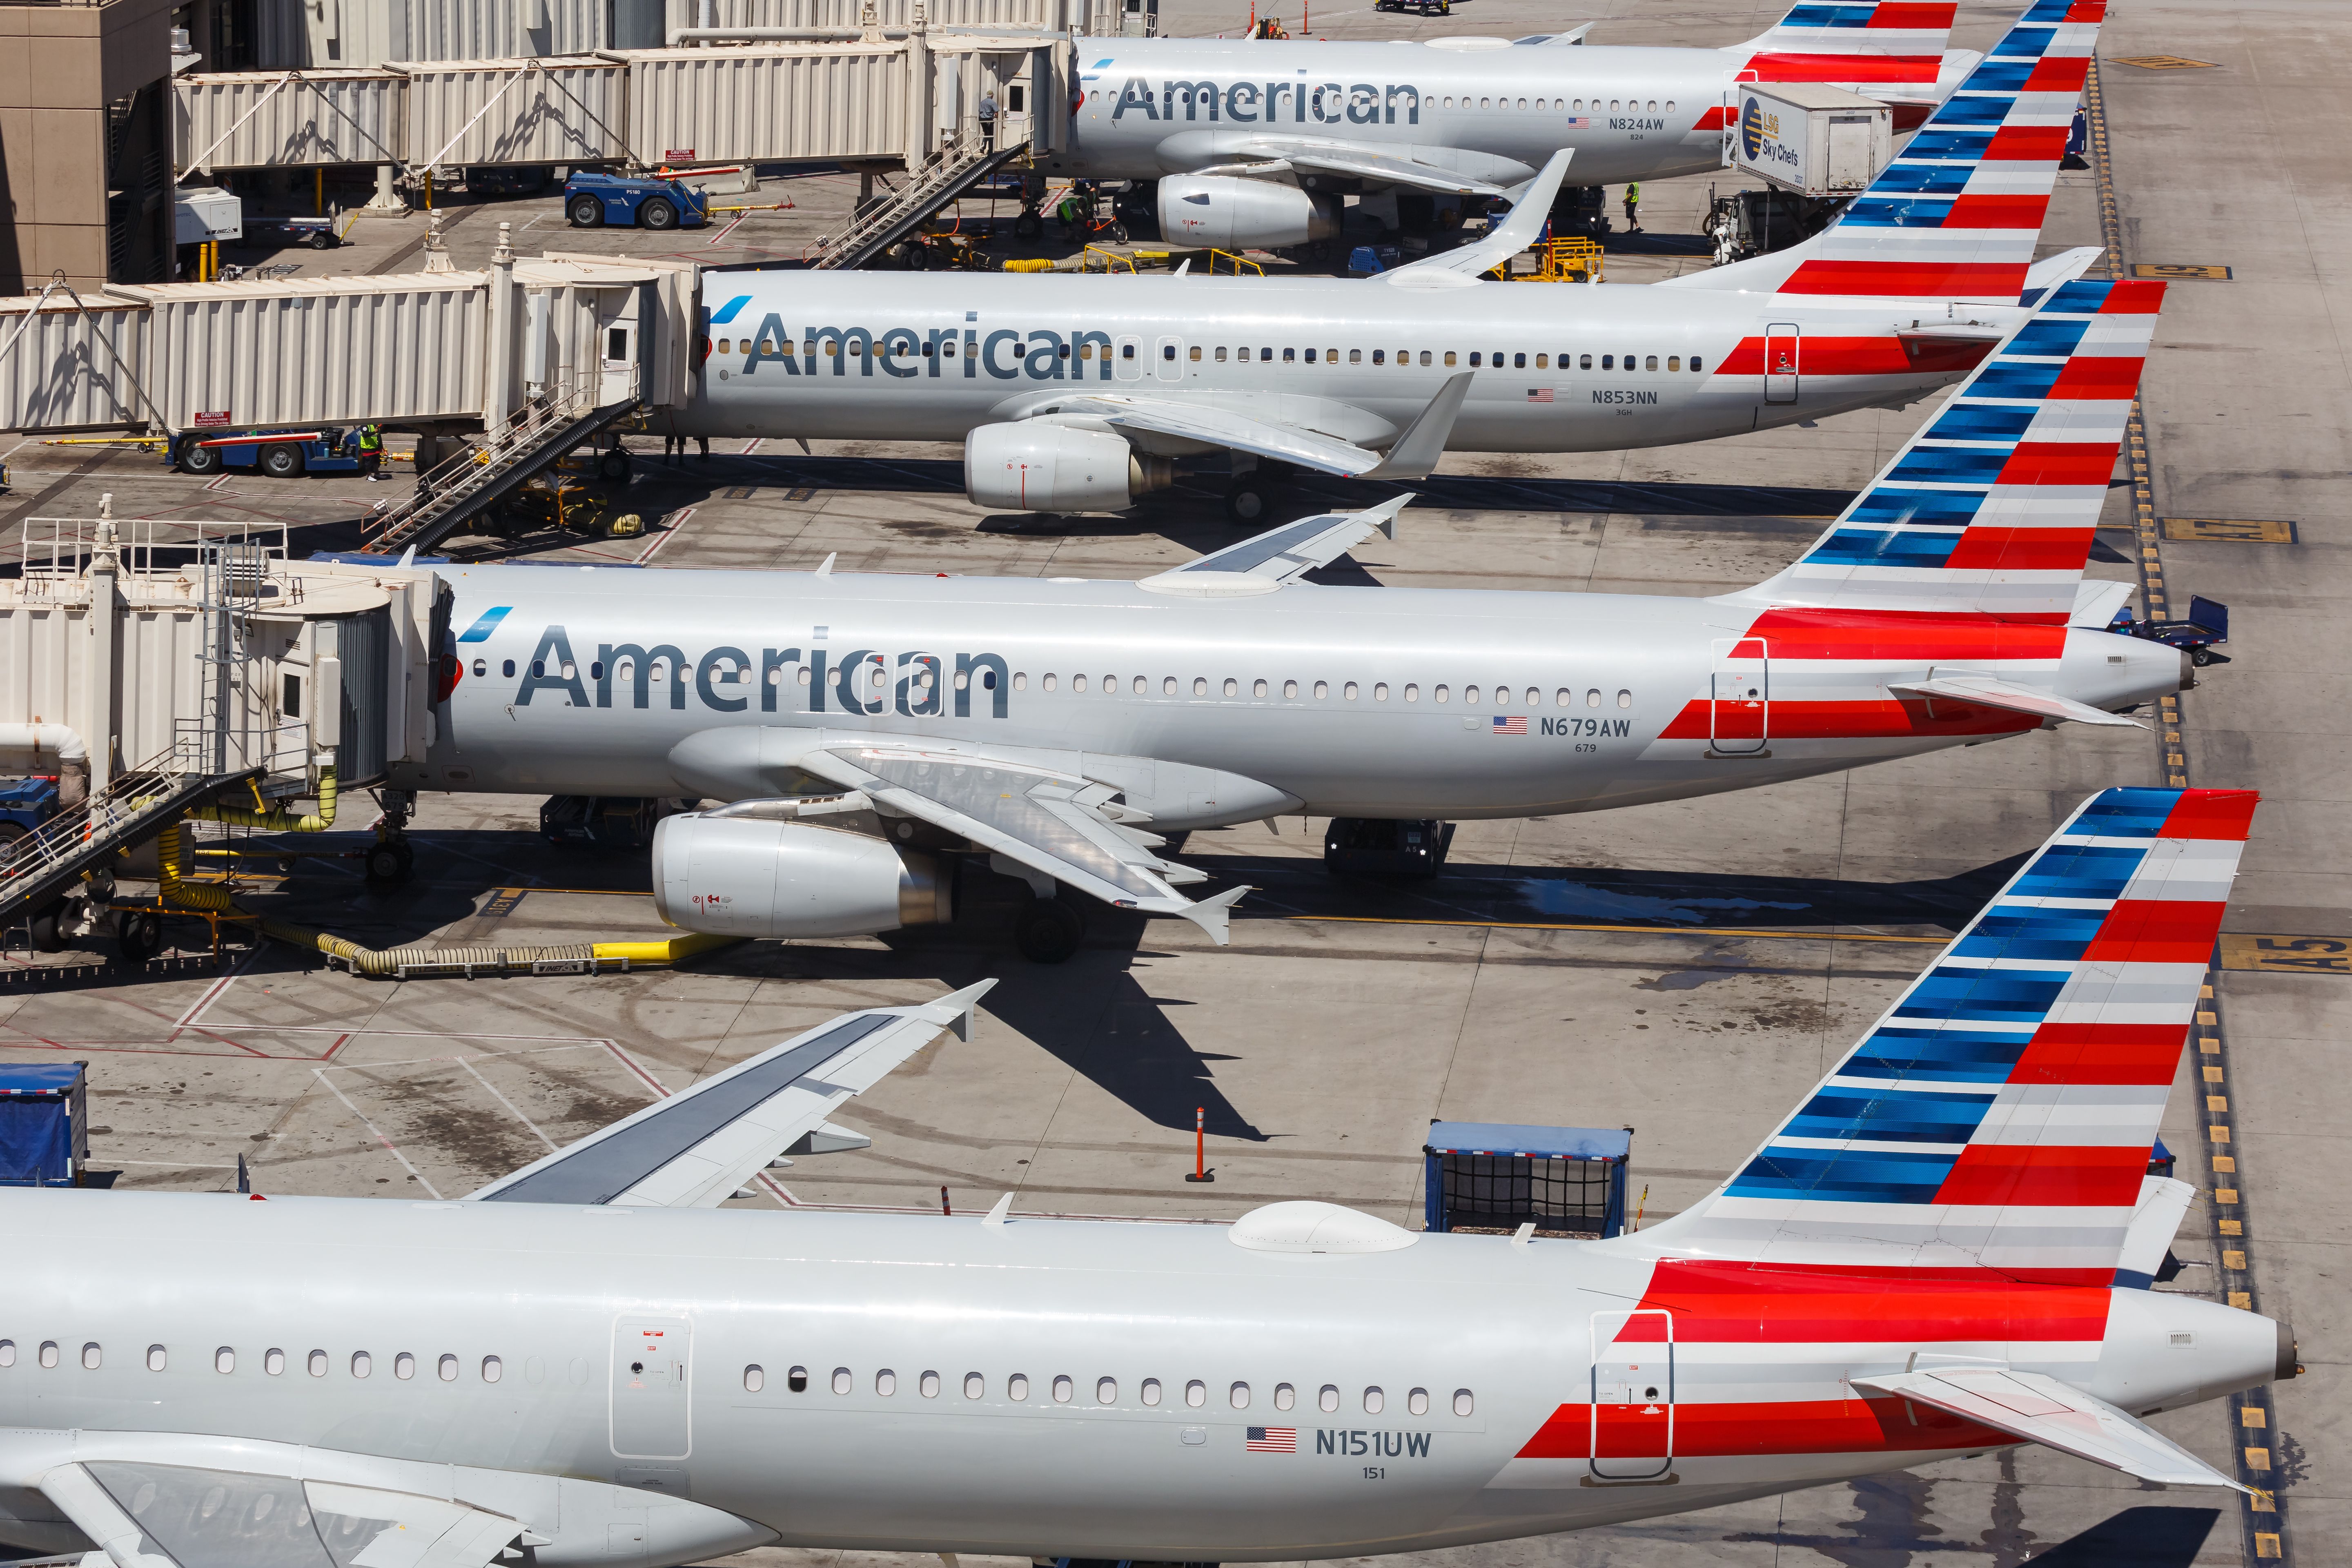 Many American Airlines aircraft parked at gates.